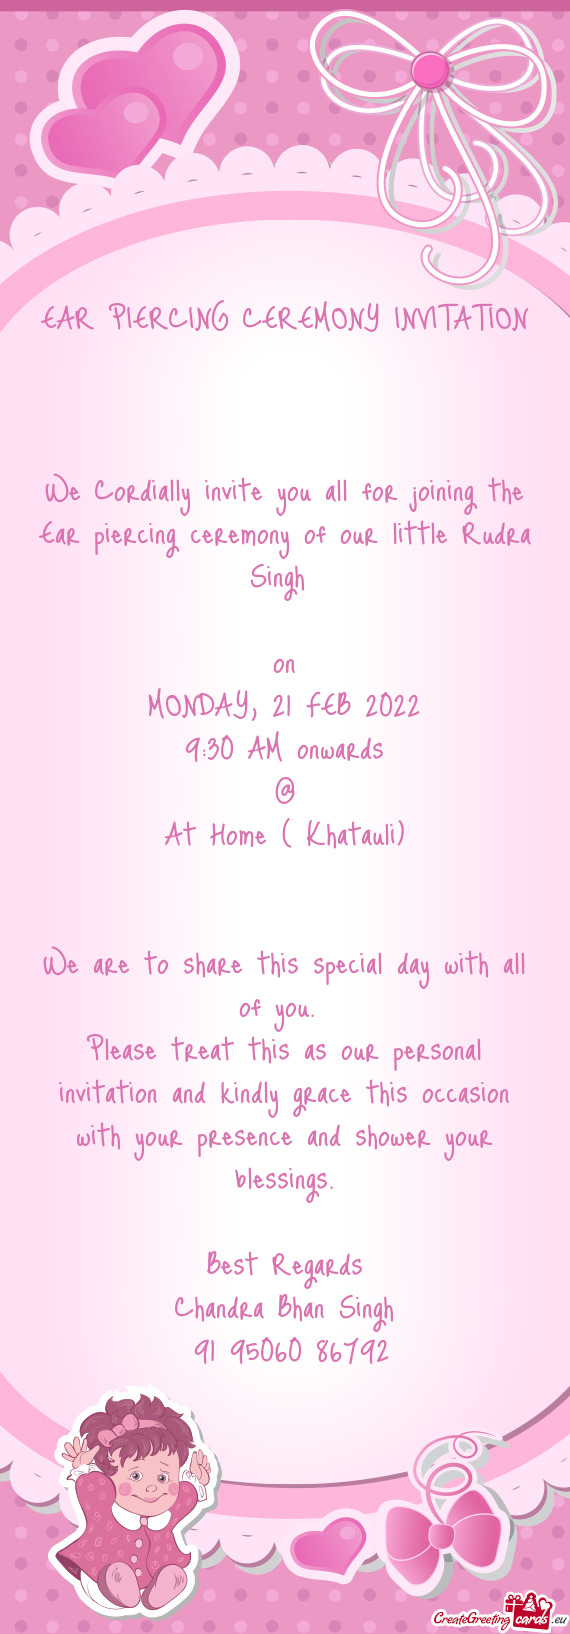 We Cordially invite you all for joining the Ear piercing ceremony of our little Rudra Singh